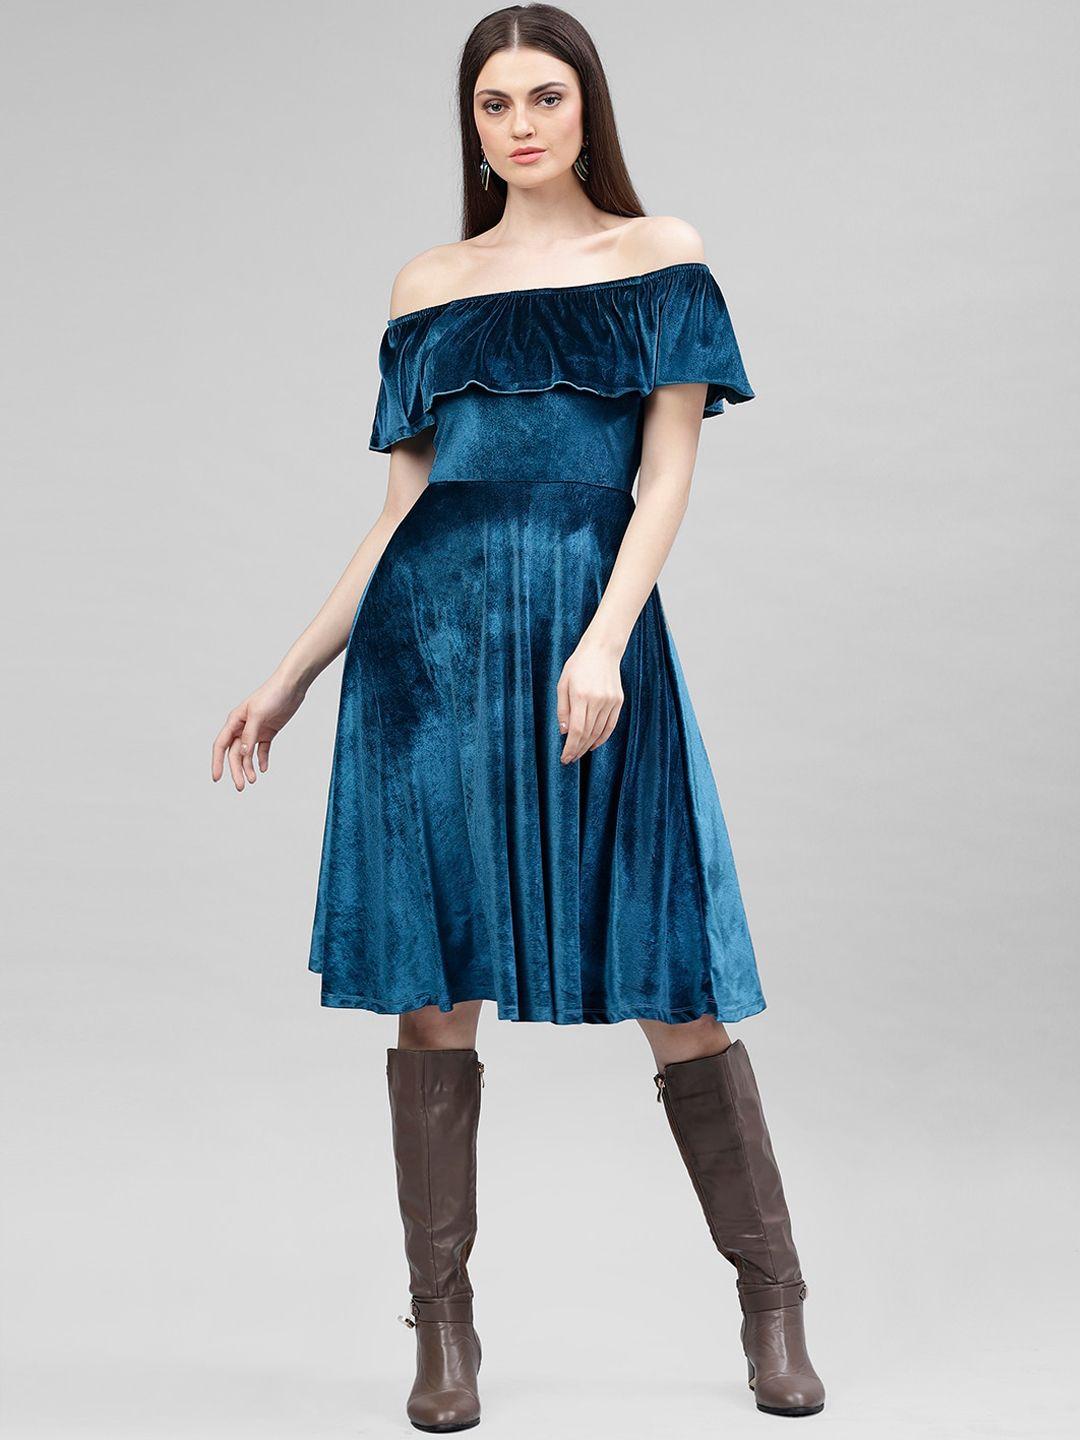 kassually-women-teal-blue-solid-off-shoulder-fit-and-flare-dress